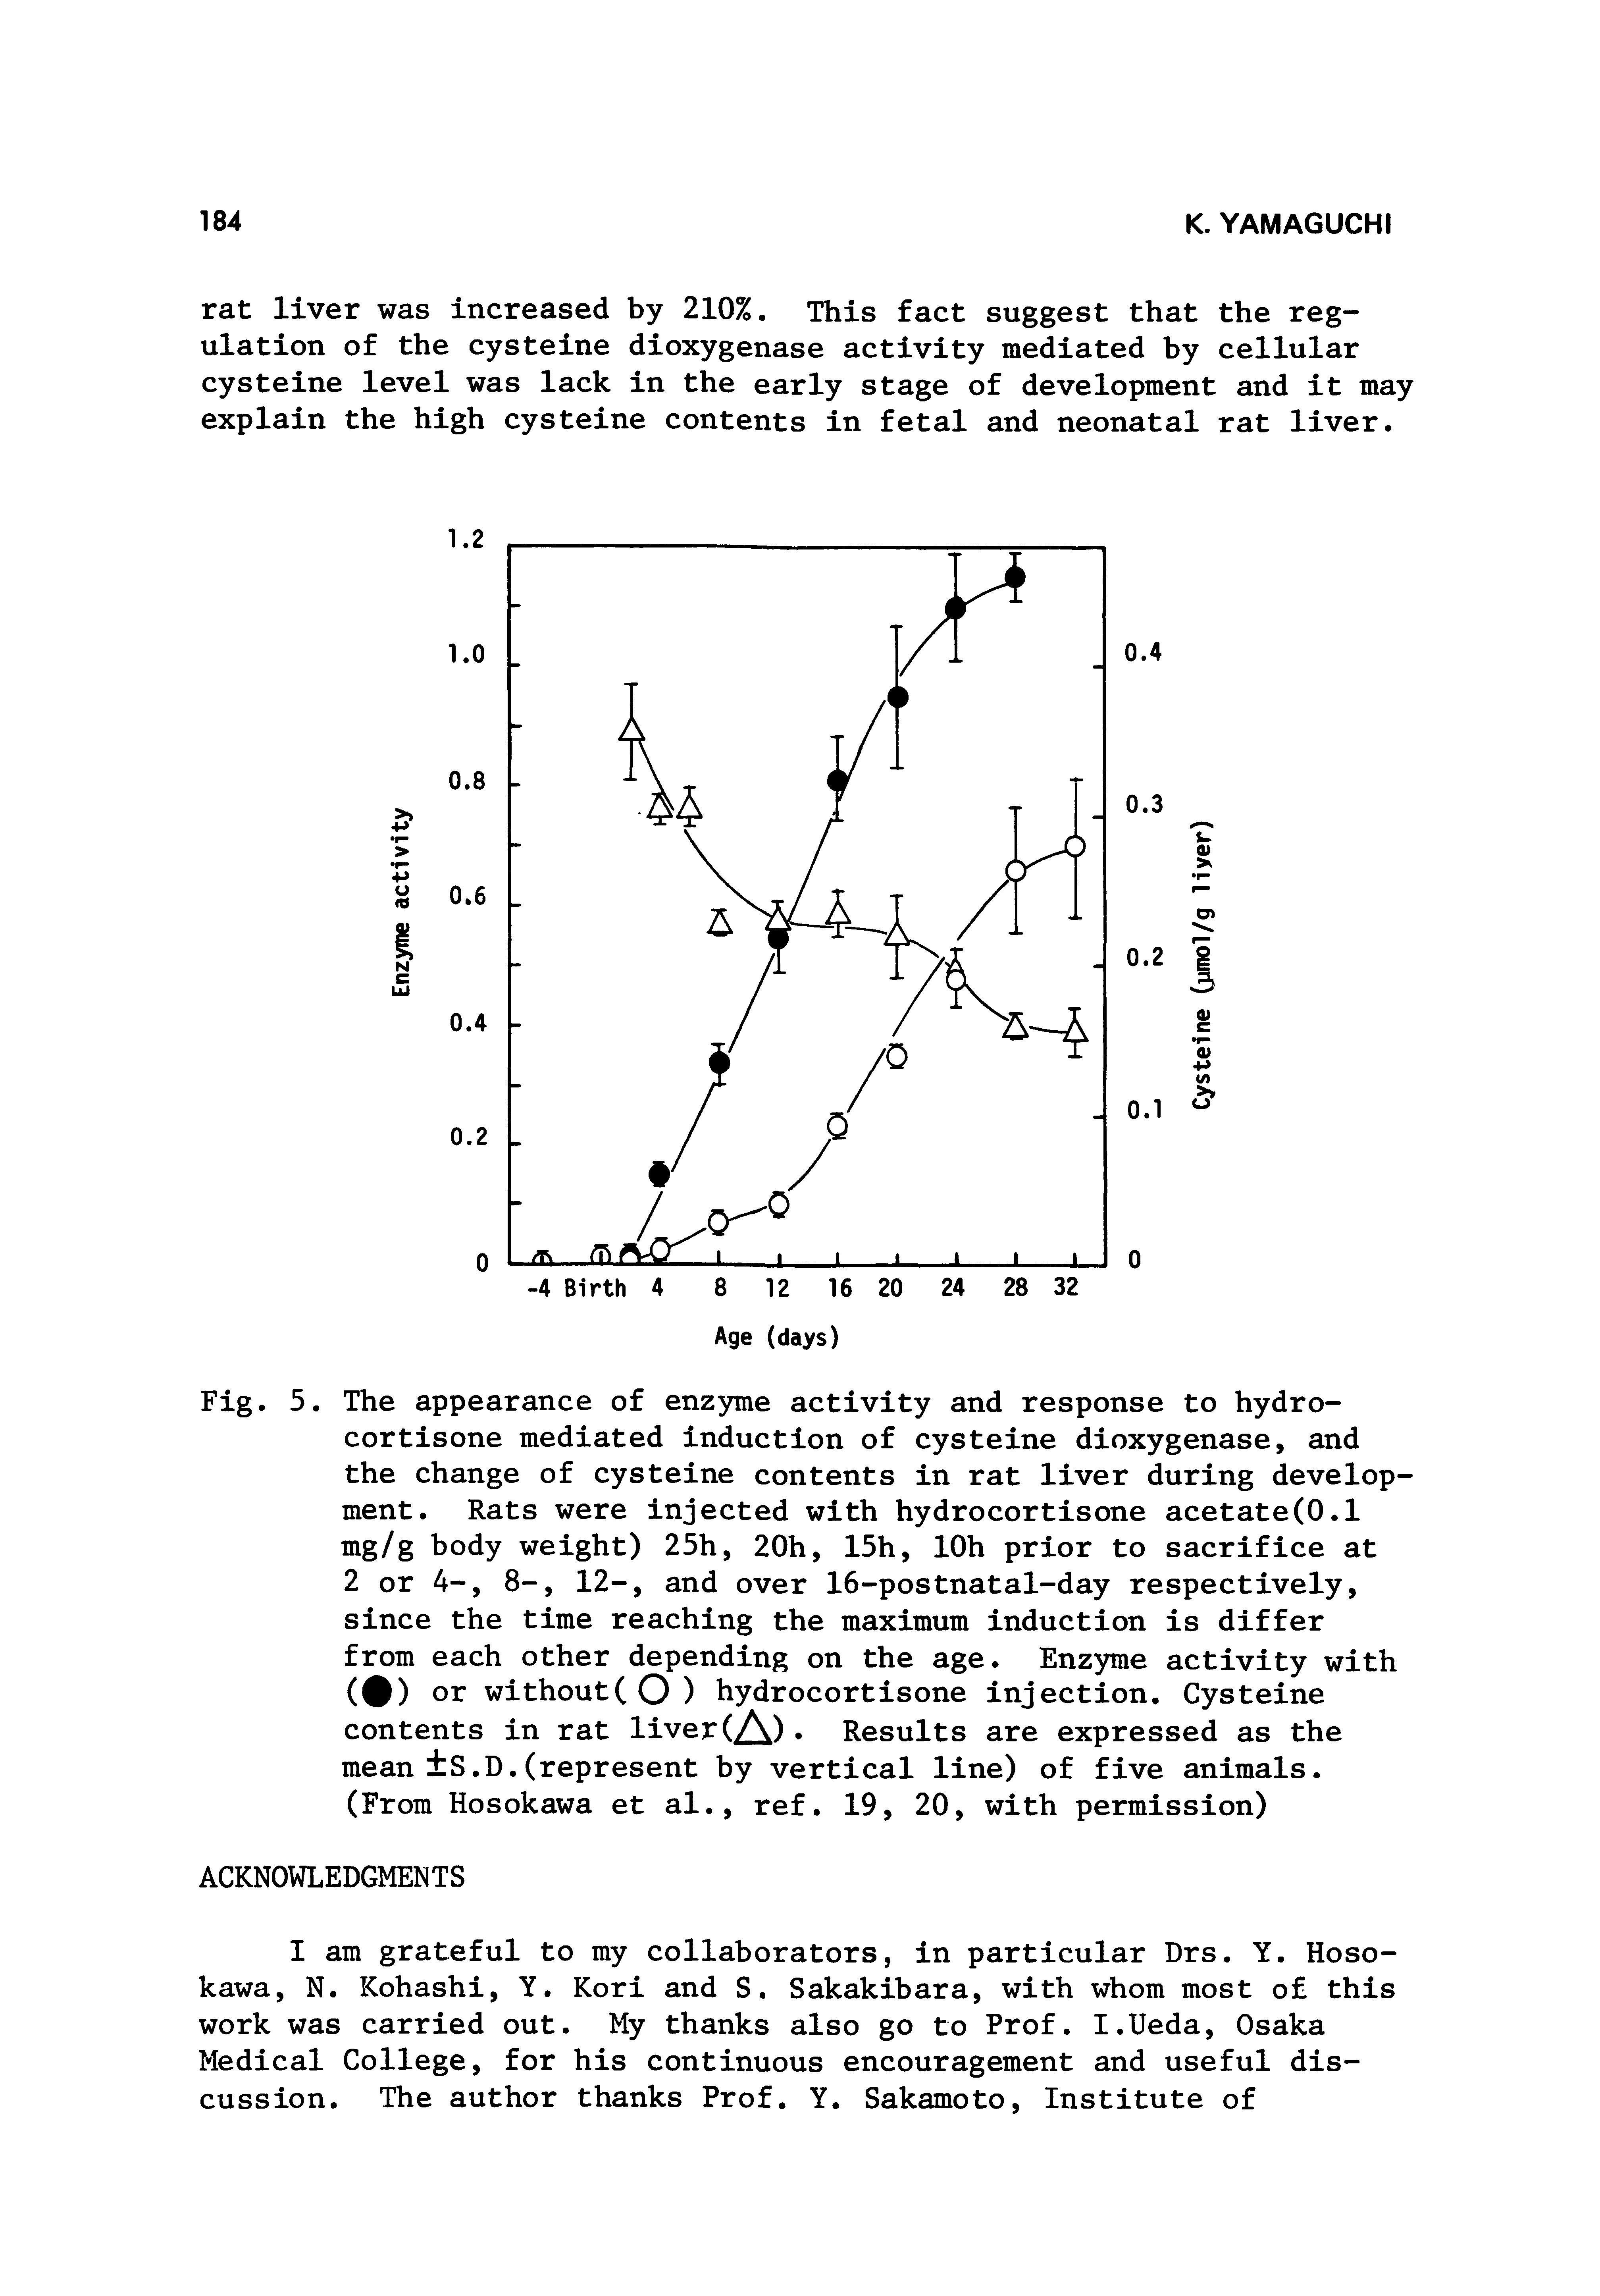 Fig. 5. The appearance of enzyme activity and response to hydrocortisone mediated induction of cysteine dioxygenase, and the change of cysteine contents in rat liver during development. Rats were injected with hydrocortisone acetate(0.1 mg/g body weight) 25h, 20h, 15h, lOh prior to sacrifice at 2 or 4-, 8-, 12-, and over 16-postnatal-day respectively, since the time reaching the maximum induction is differ from each other depending on the age. Enzyme activity with (0) Of without(O) hydrocortisone injection. Cysteine contents in rat liver (A) Results are expressed as the mean S.D.(represent by vertical line) of five animals.